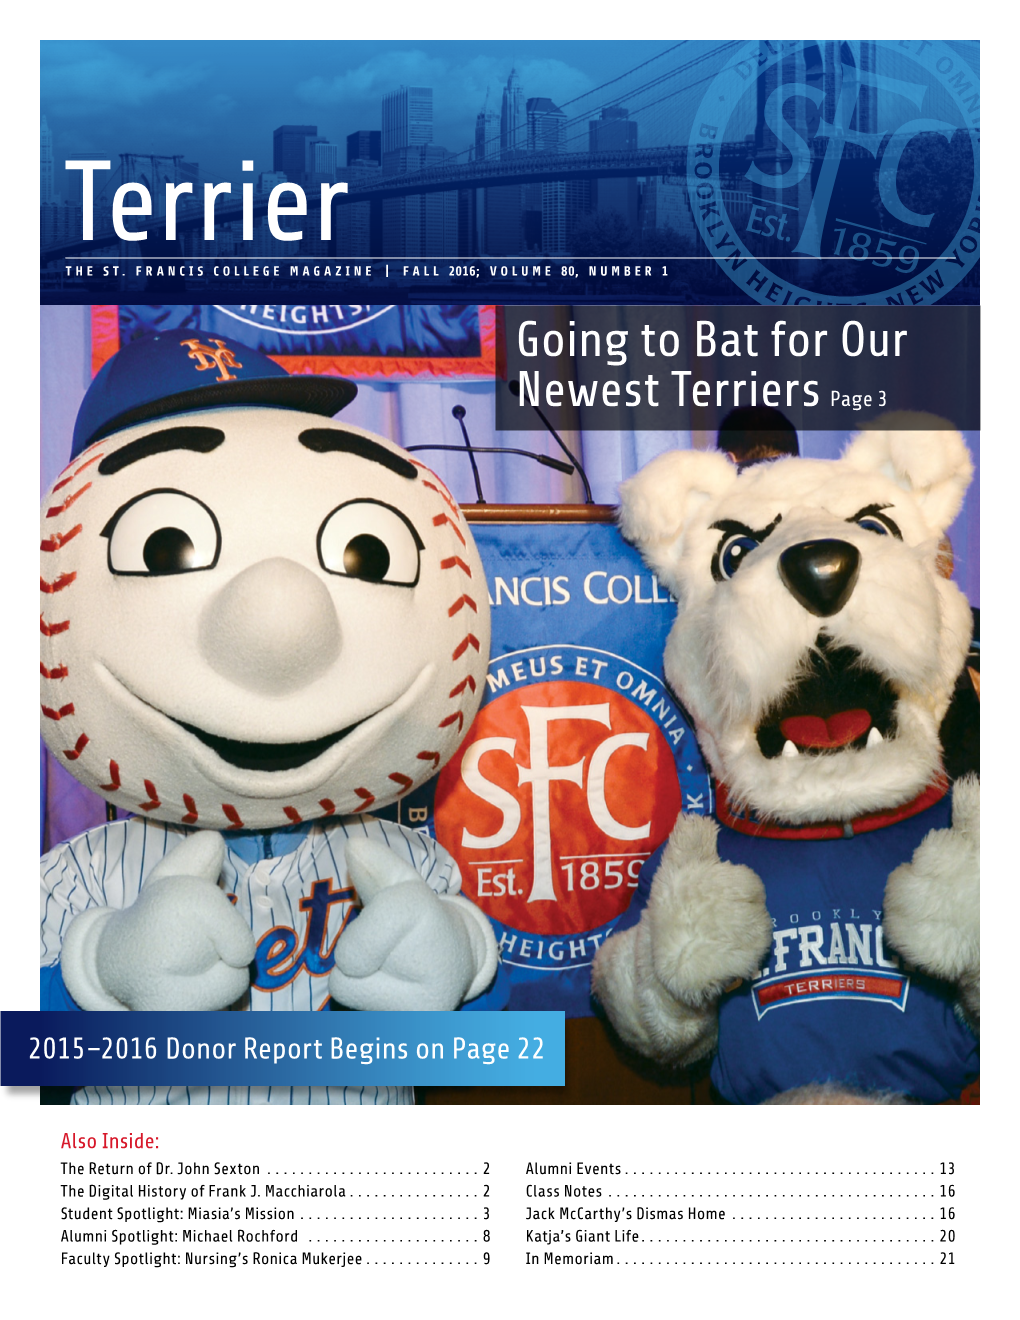 St. Francis College Terrier, Fall 2016